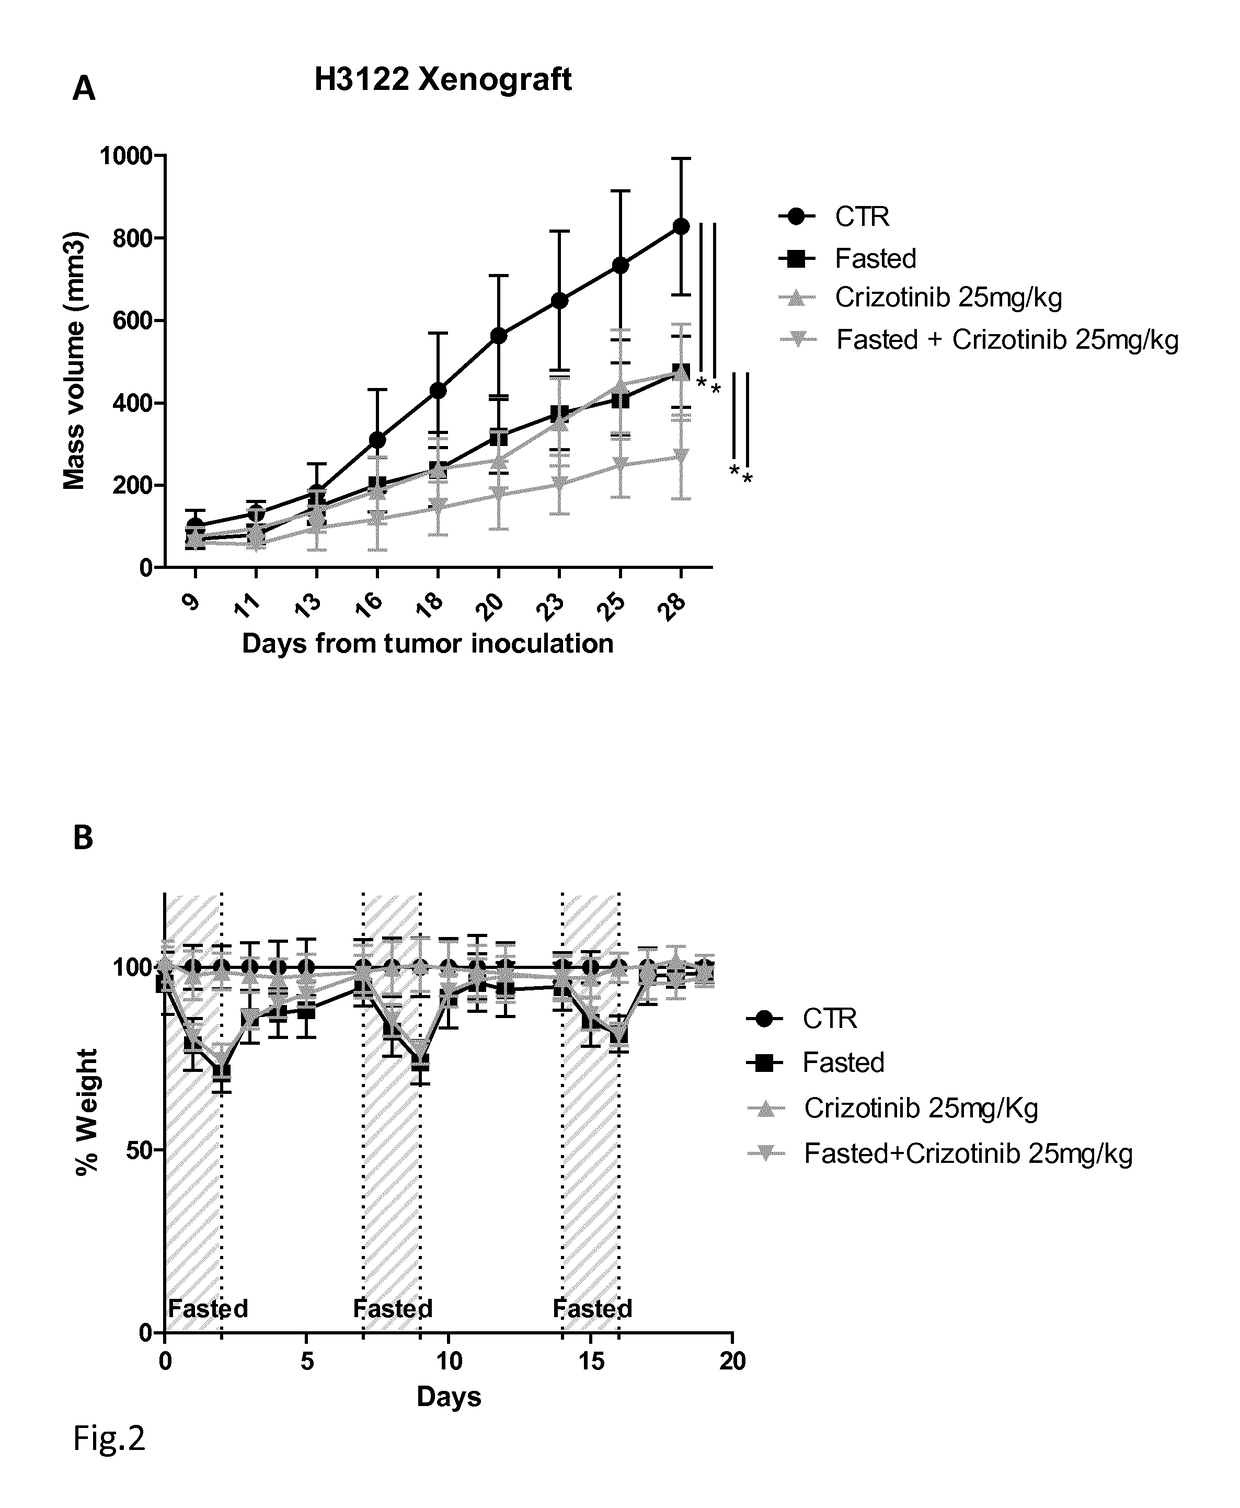 Tyrosine kinase inhibitors for use in a method of treating cancer in association with a reduced caloric intake